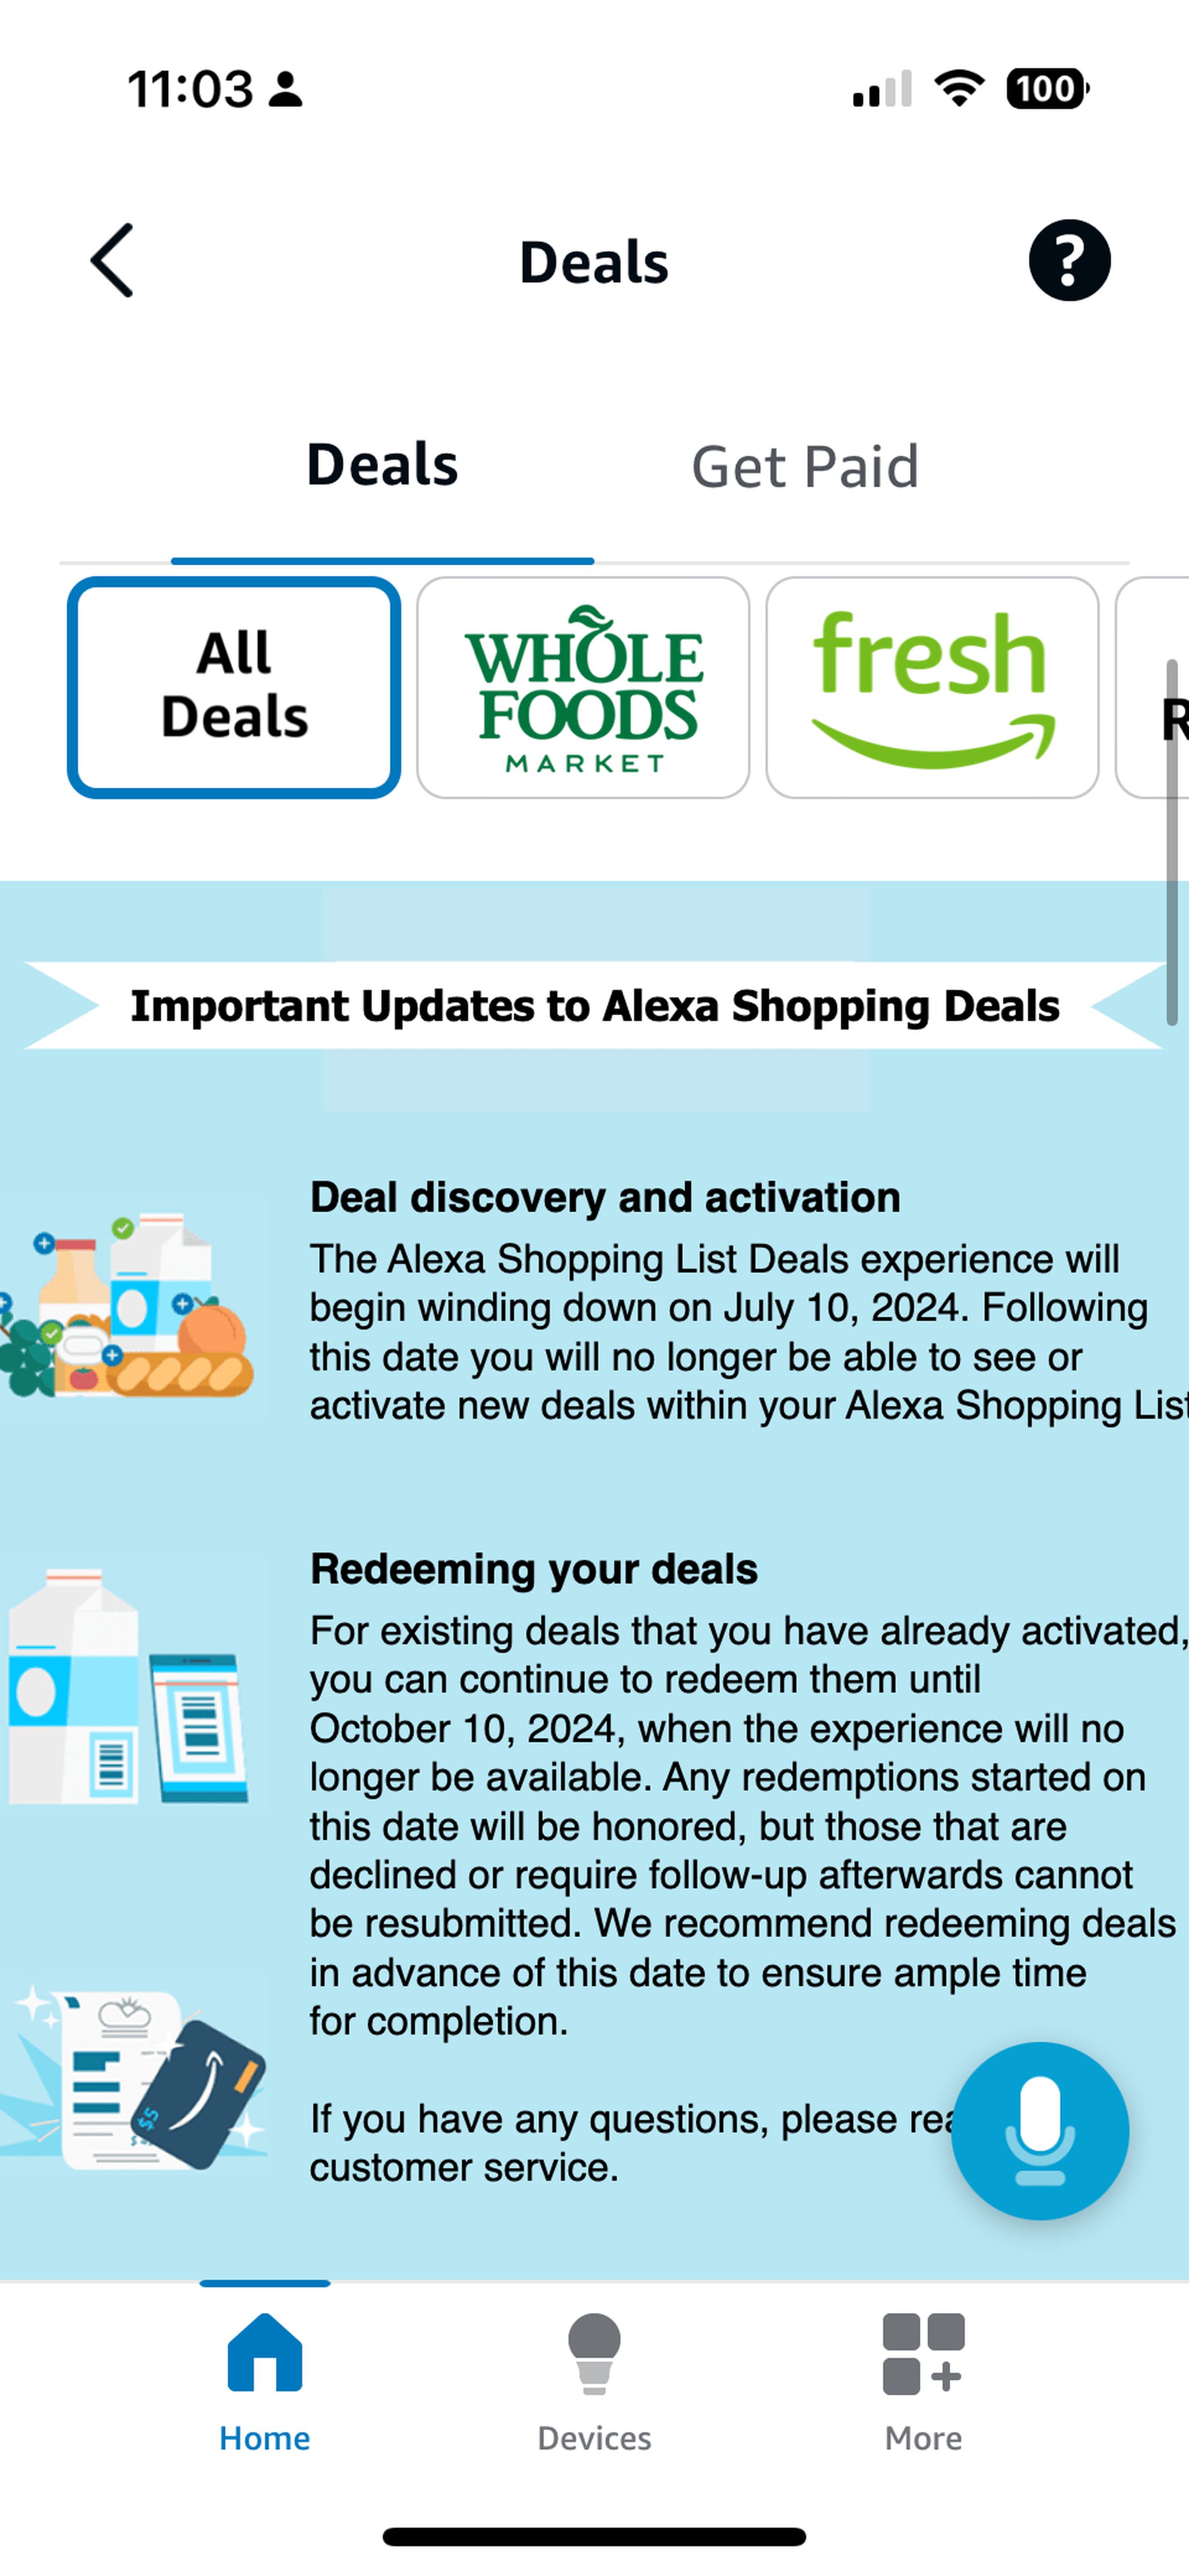 <em>Alexa’s shopping list has a deals feature that is also being sunsetted.</em>